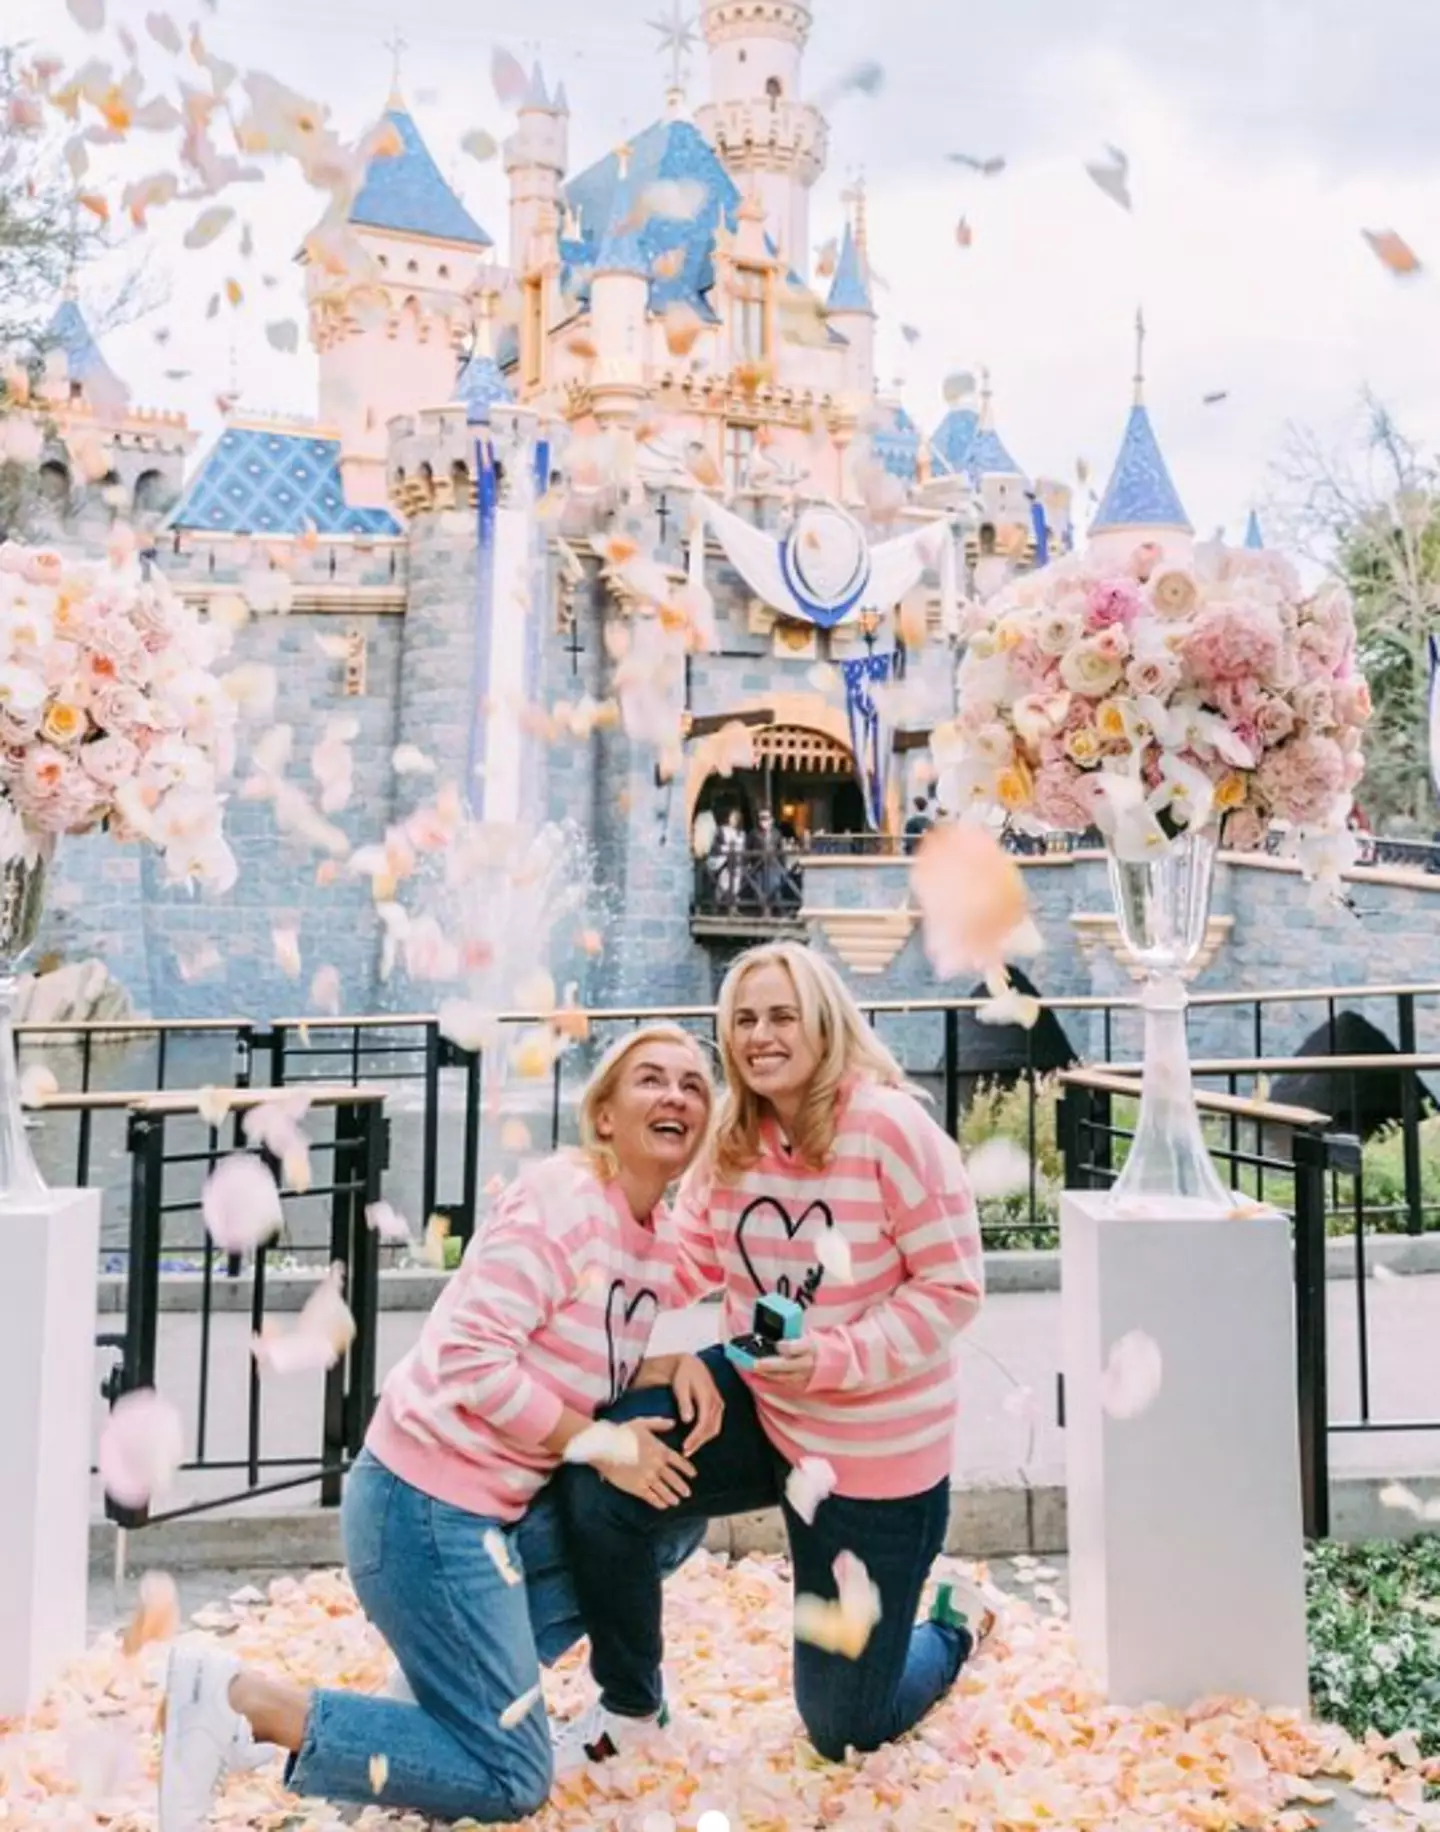 The actor got engaged at Disneyland just last month.